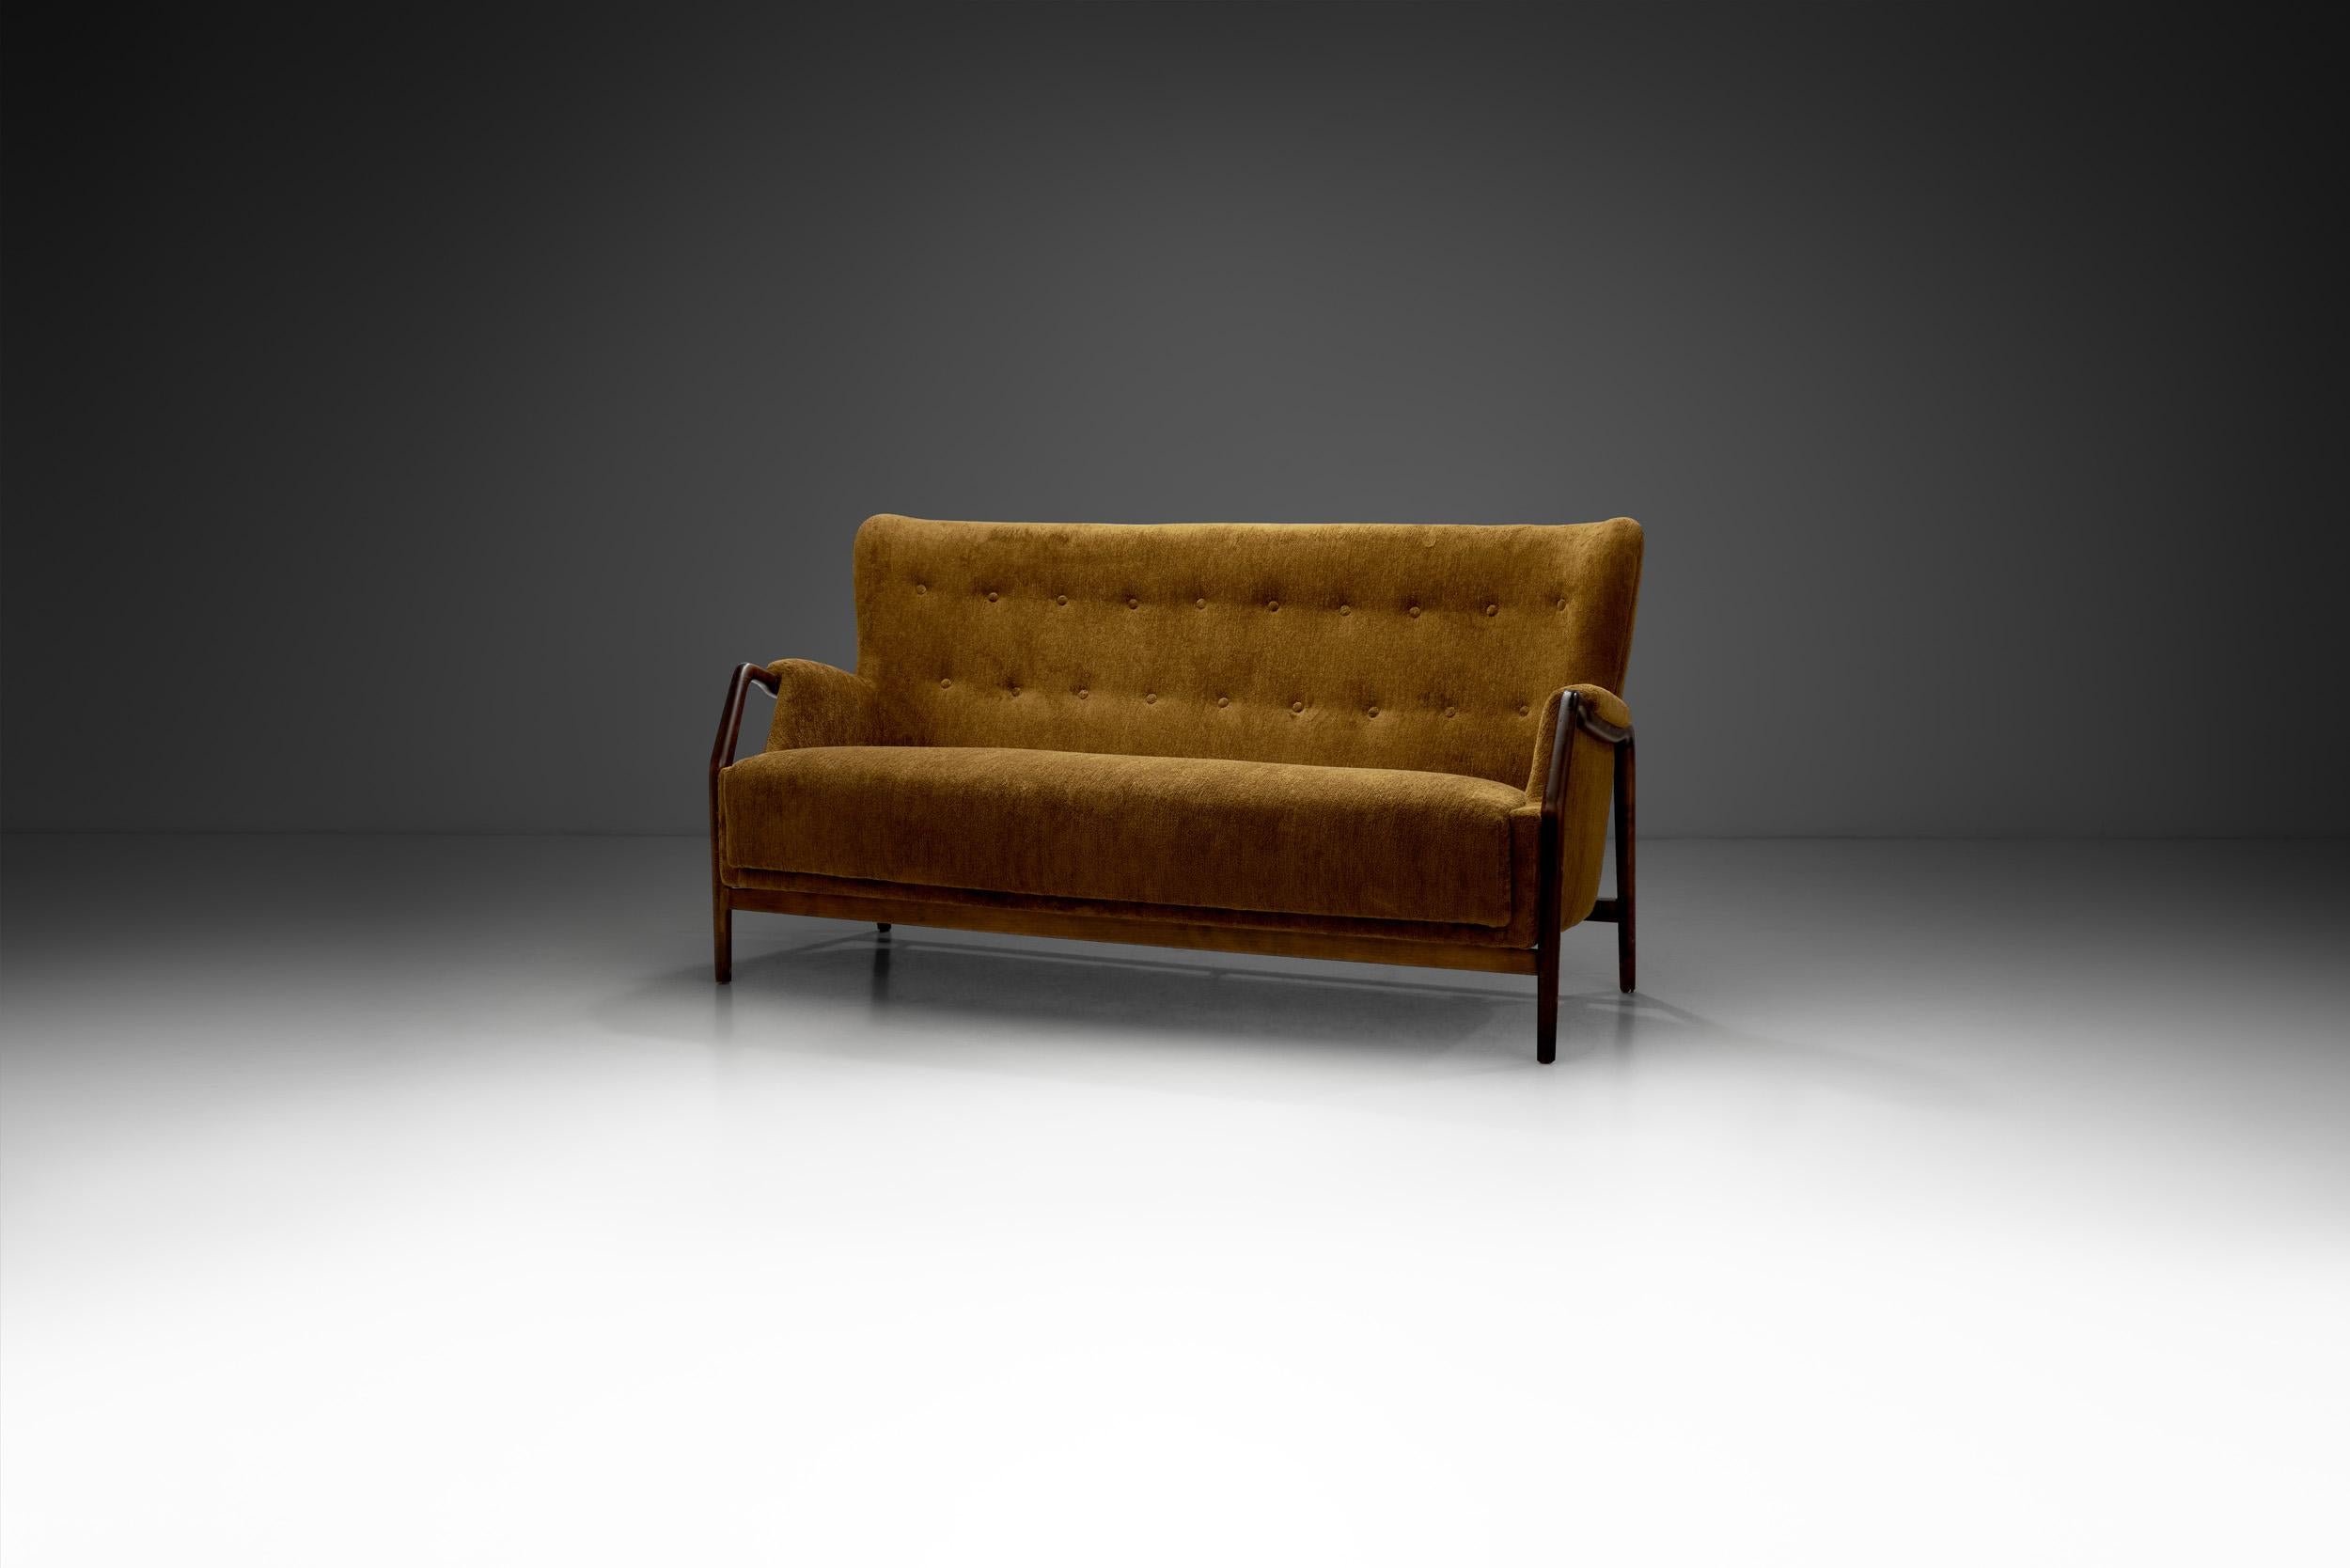 The “Model 214” sofa was designed by Danish designer and architect Kurt Olsen during the 1960s and unifies some of the best characteristics of the Danish Mid-Century Modern movement’s design aesthetic and craftsmanship.

Like many of his